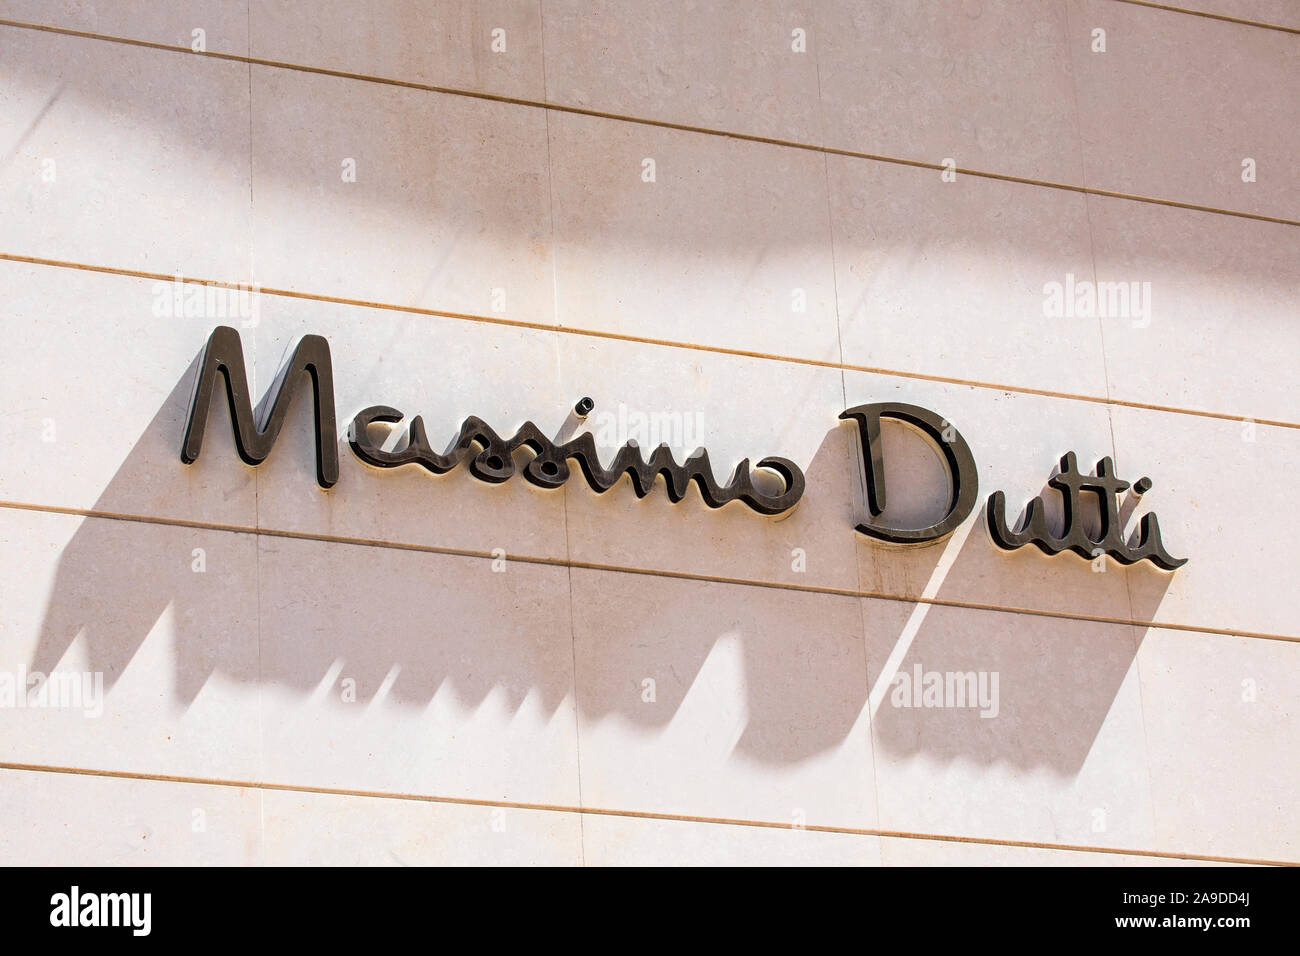 Benidorm, Spain - April 13th 2019: The logo above the entrance to a Massimo  Dutti clothing store in Benidorm, Spain Stock Photo - Alamy